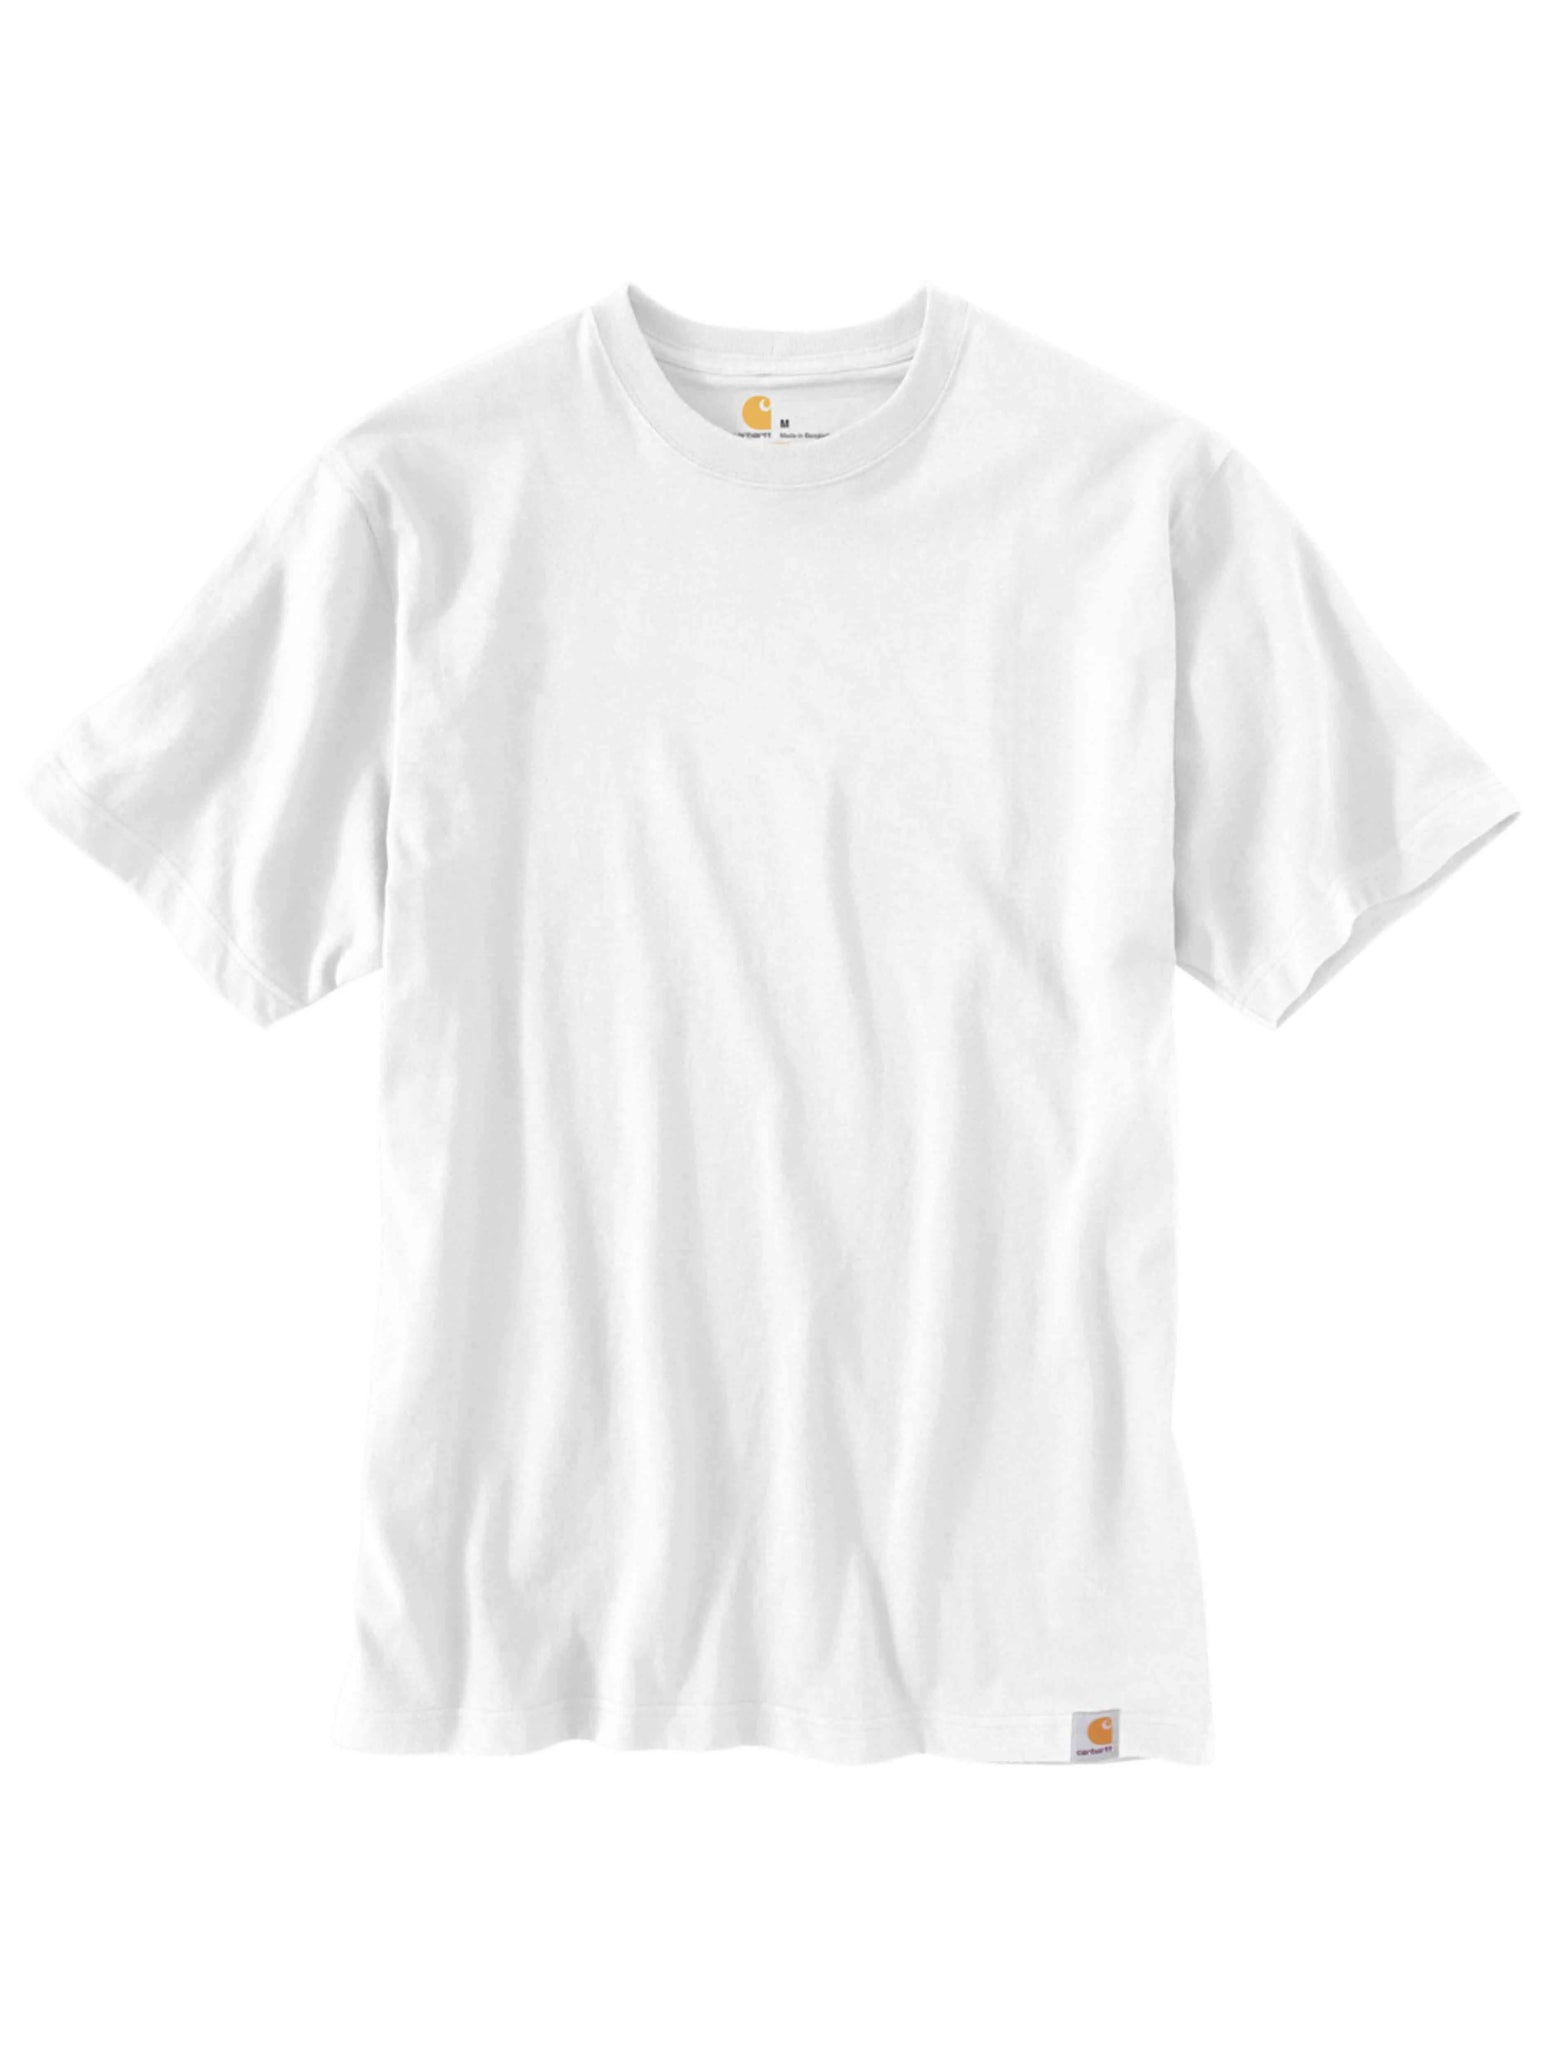 Carhartt Solid Tee White Prior